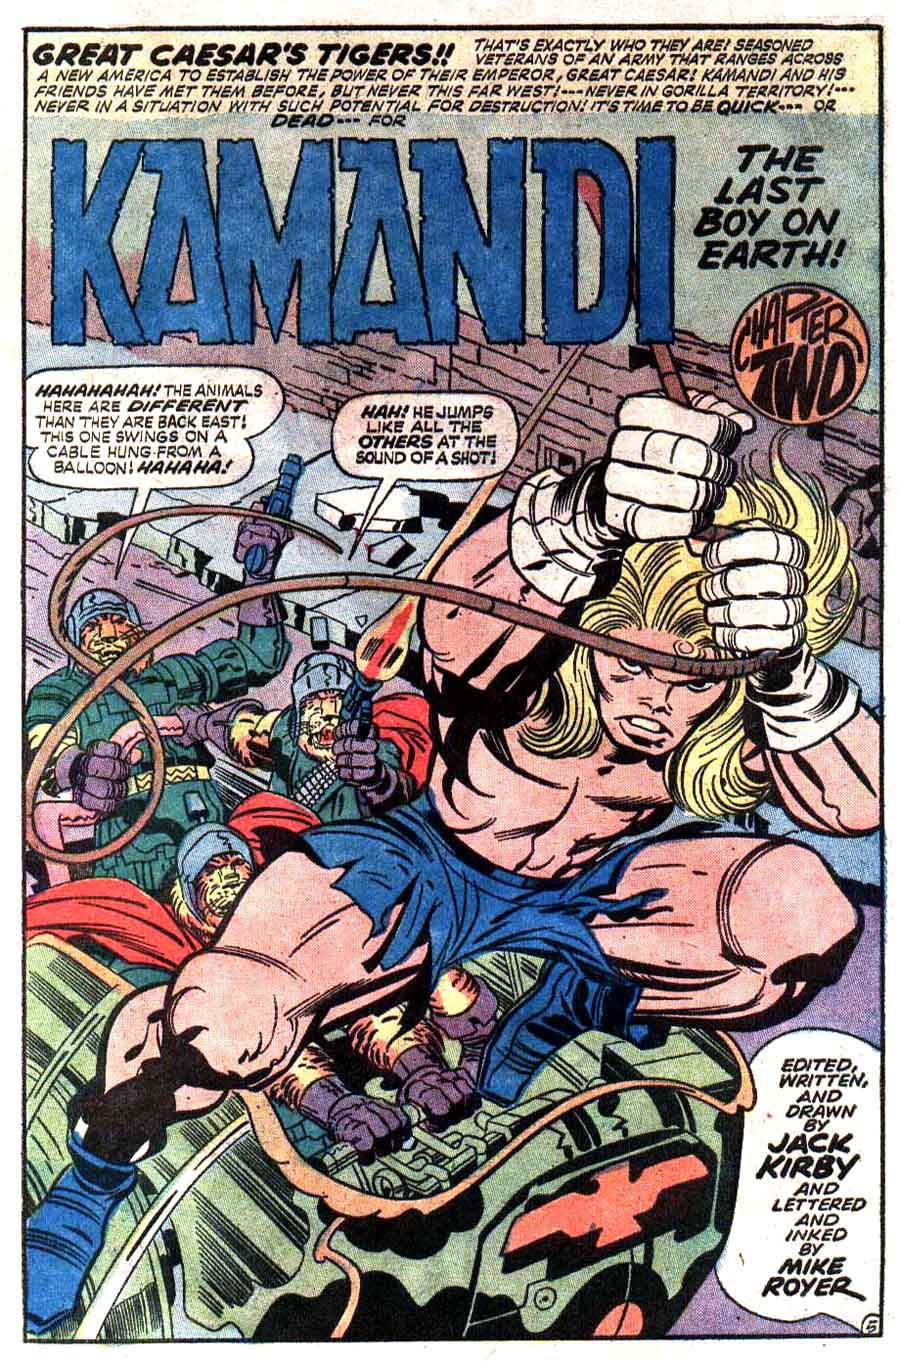 Kamandi v1 #4 dc bronze age comic book page art by Jack Kirby, Mike Royer